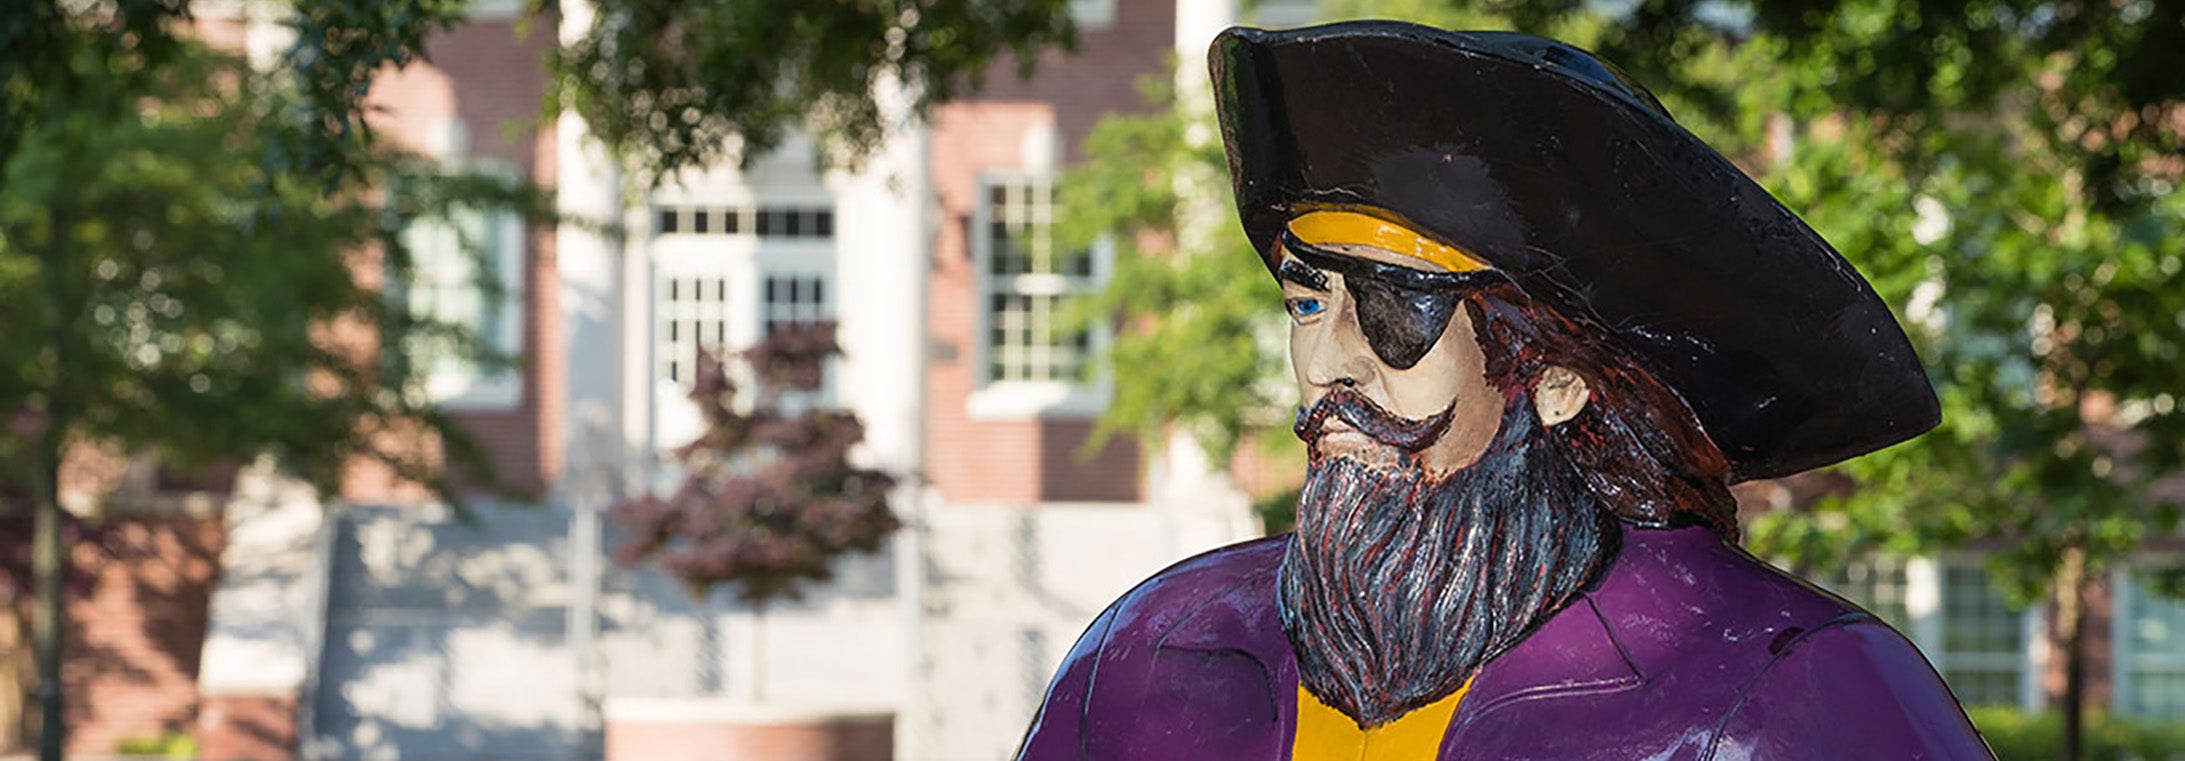 Statue of Pee Dee the Pirate on campus